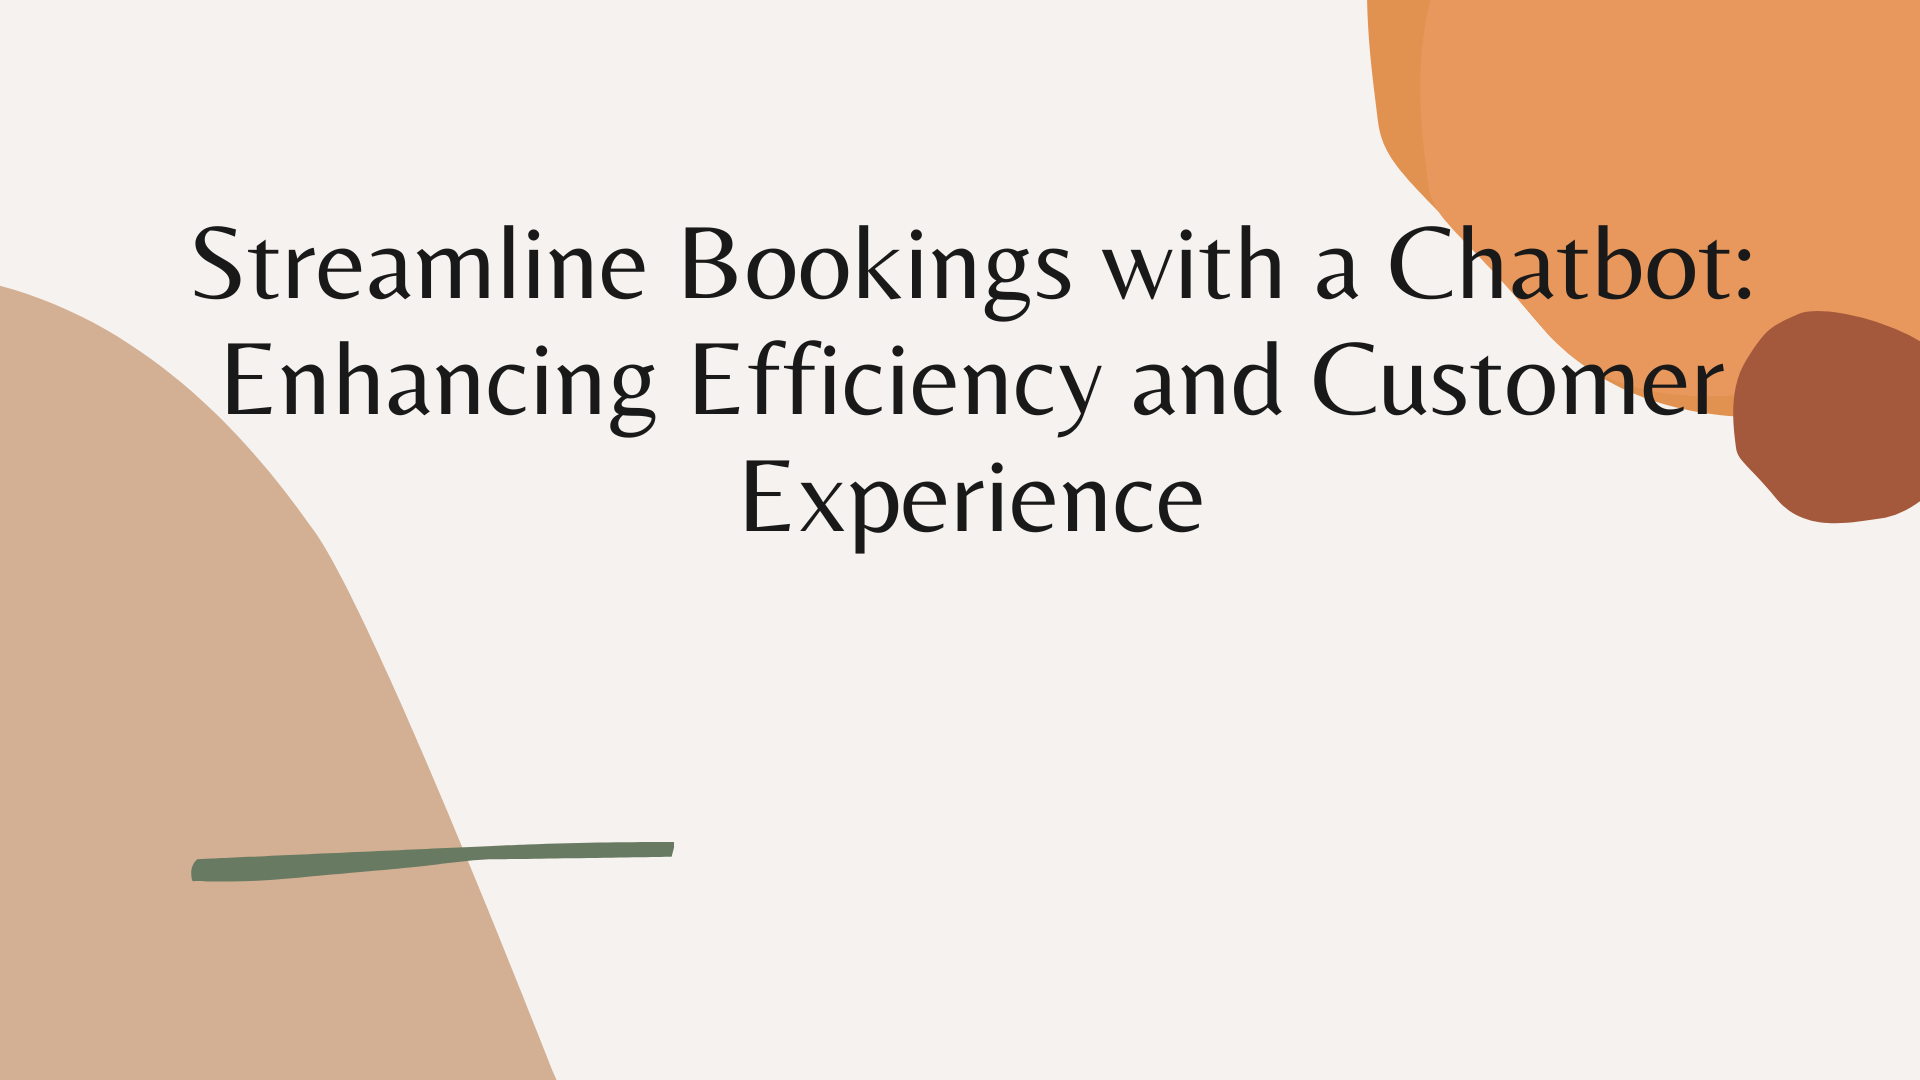 Streamline Bookings with a Chatbot: Enhancing Efficiency and Customer Experience